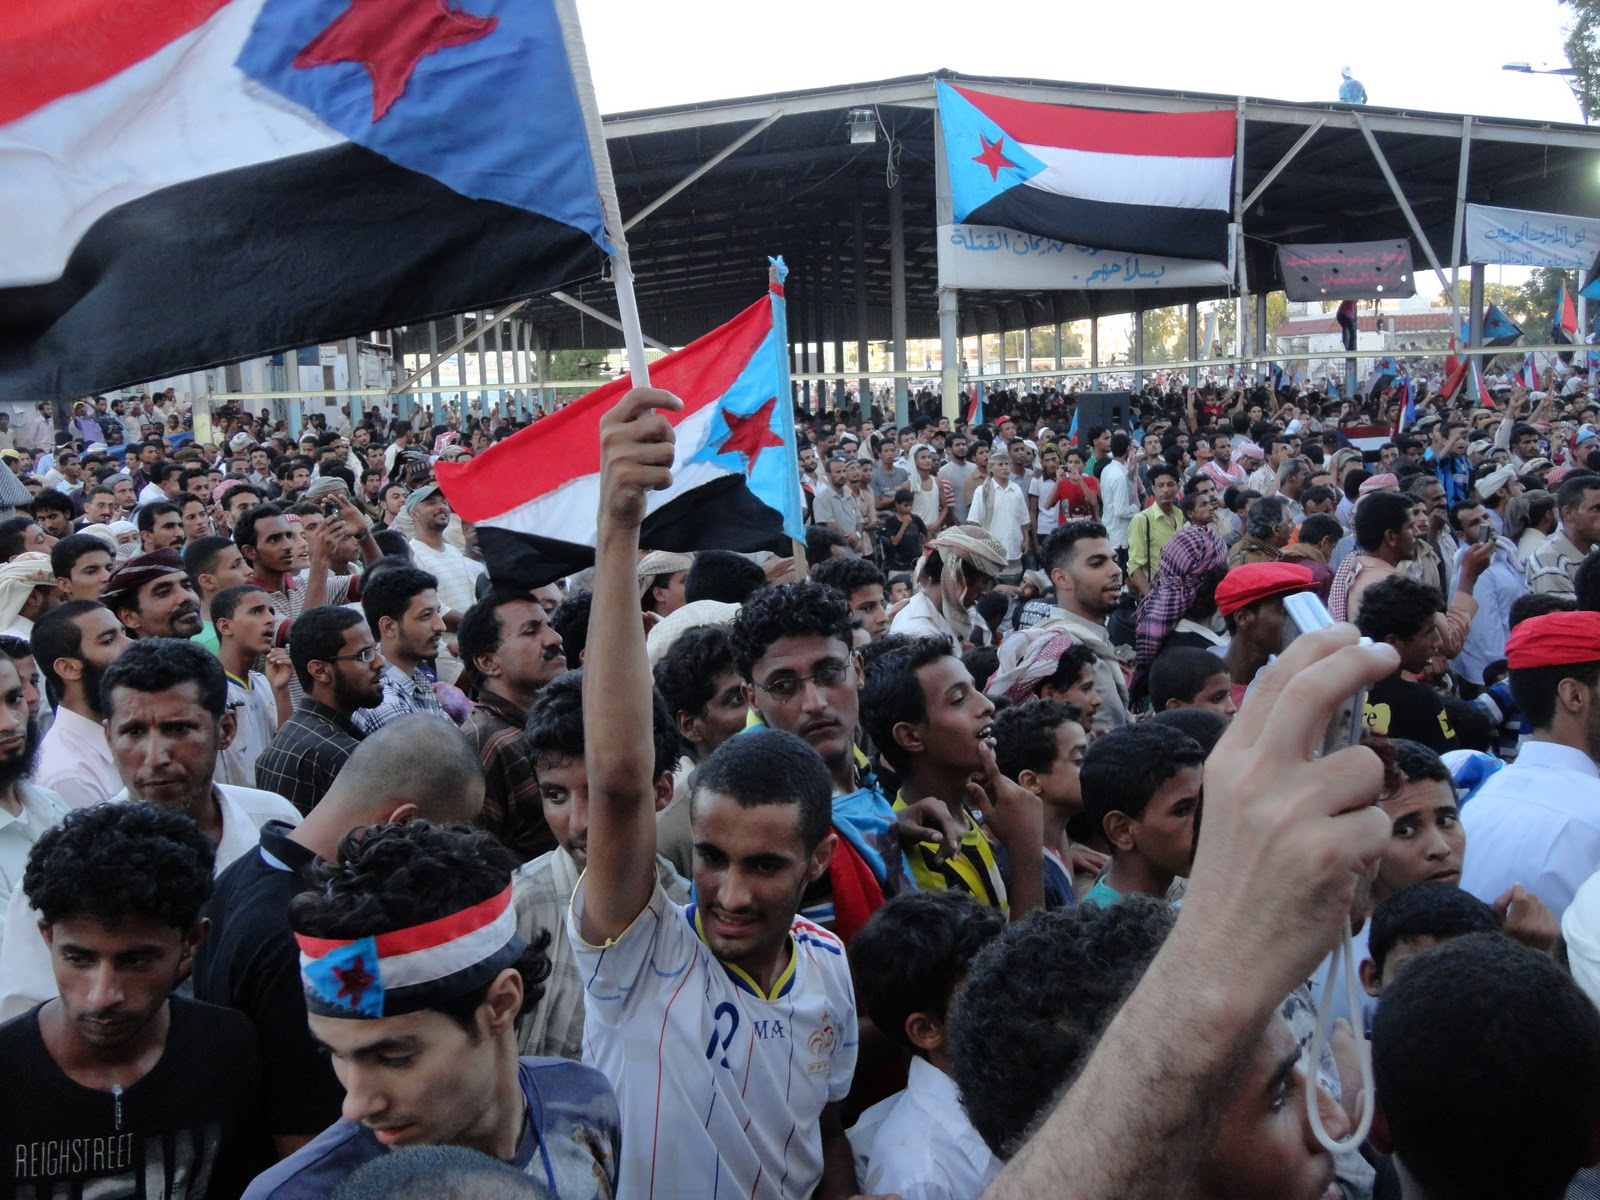 Protest during the Arab Spring in 2011